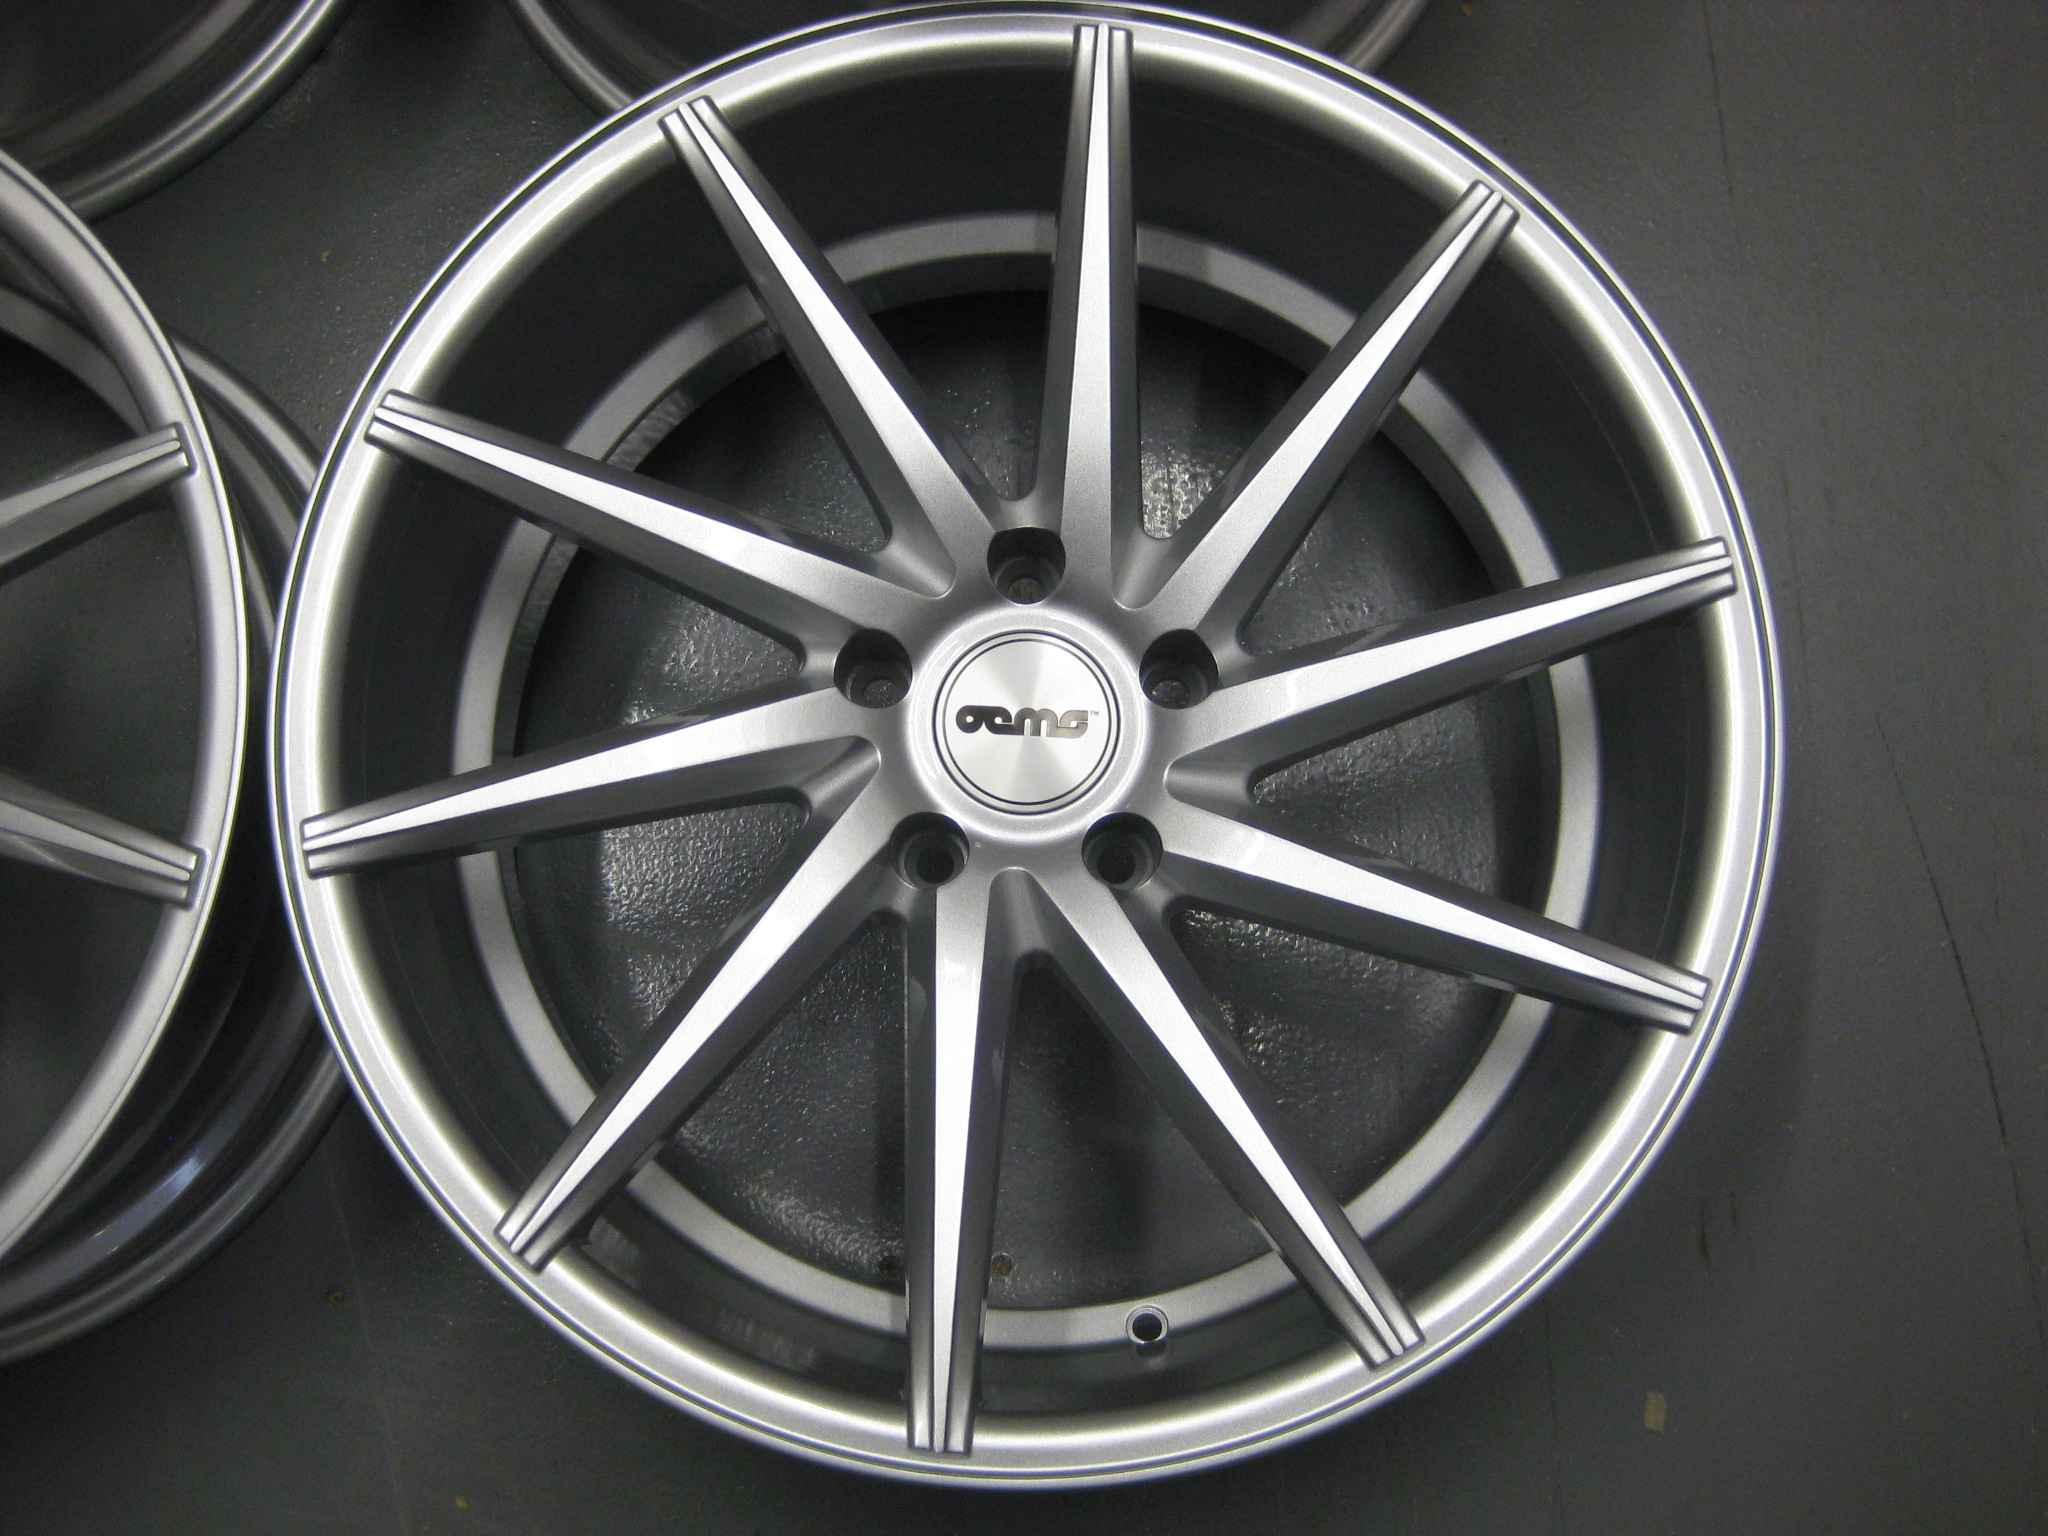 NEW 20" OEMS CVT DIRECTIONAL ALLOY WHEELS IN SILVER, WIDER 10" REAR